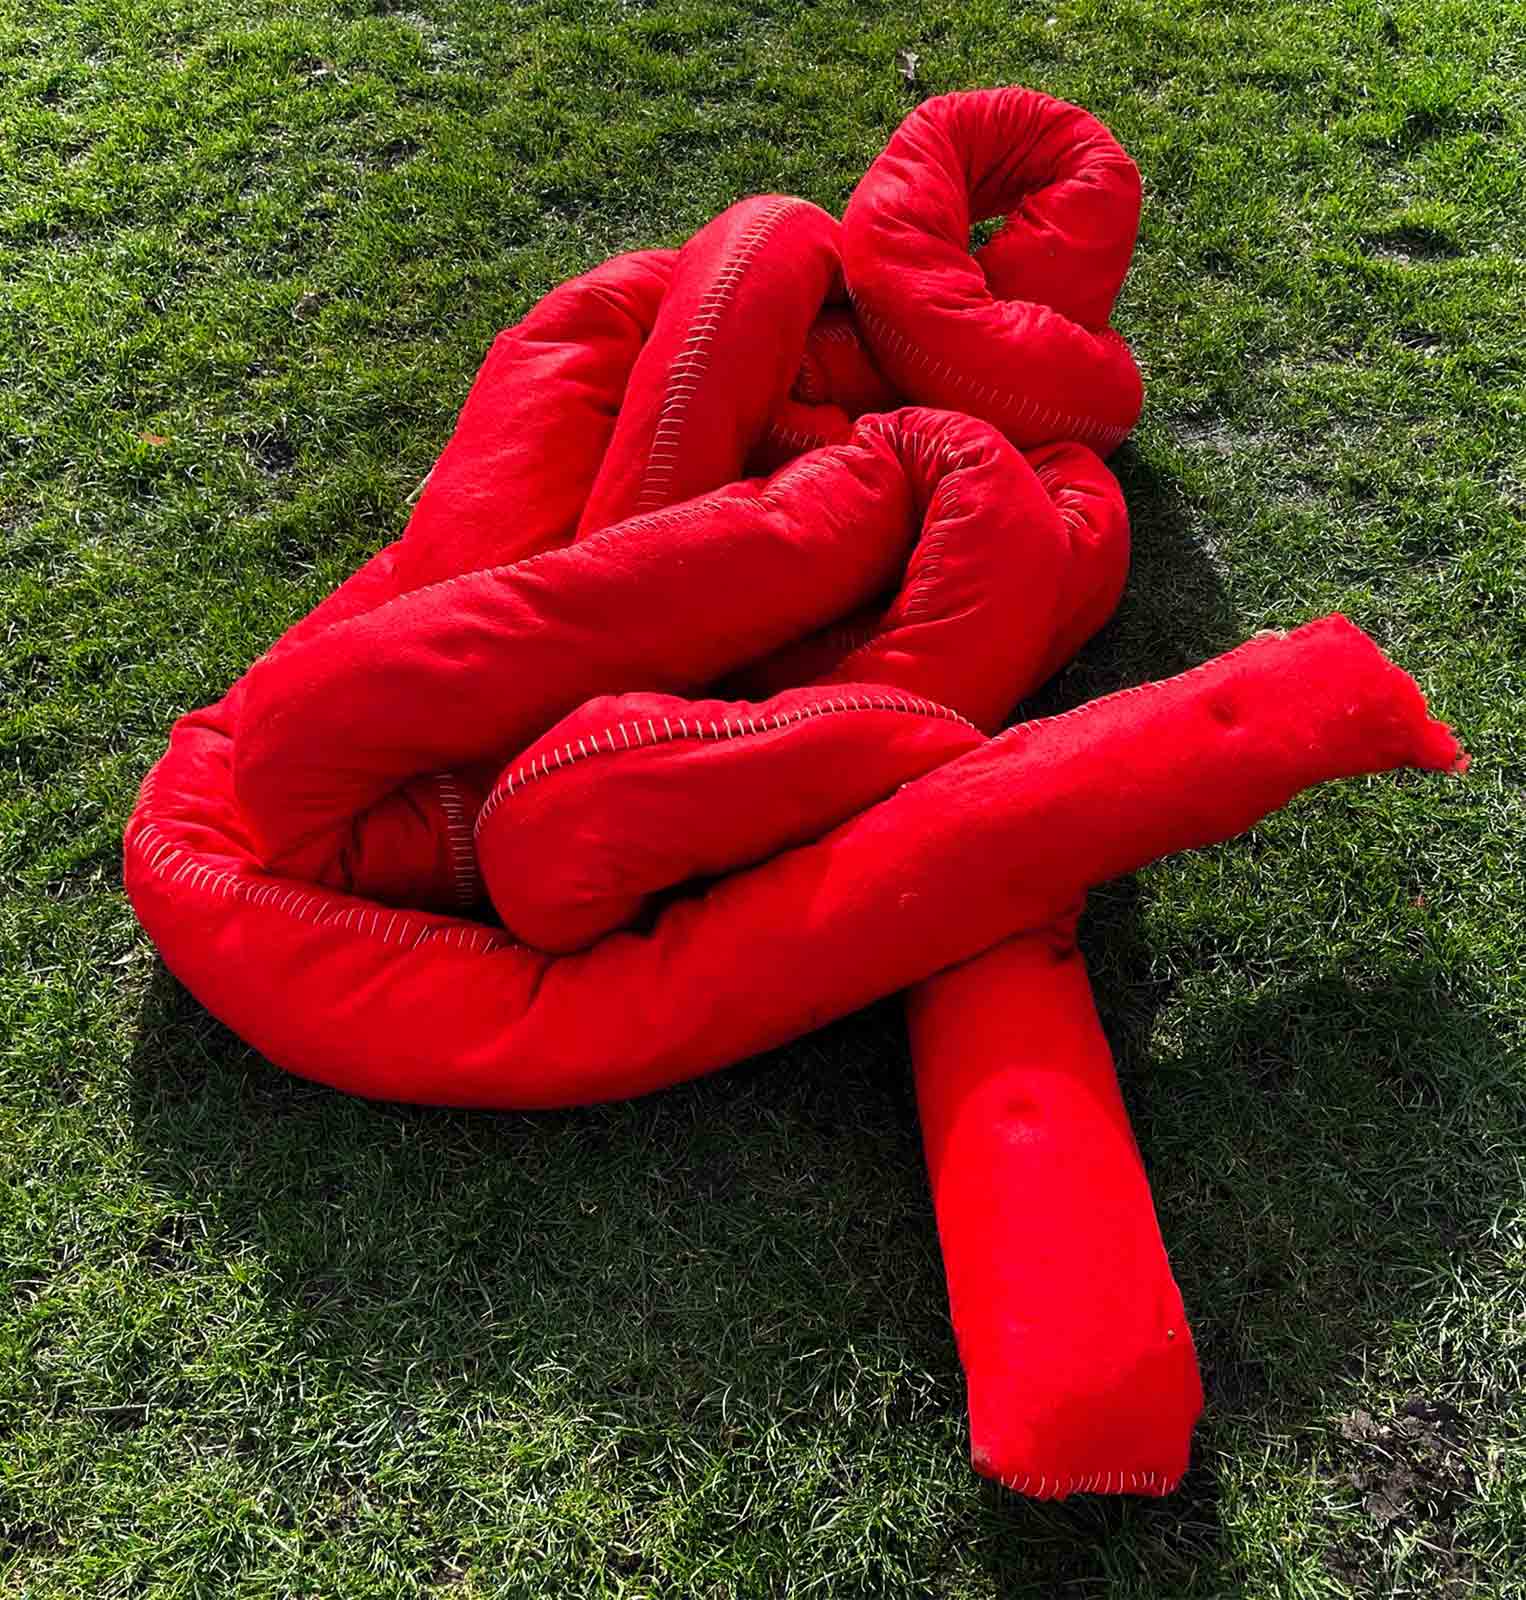 Red soft sculpture situated on grass. 